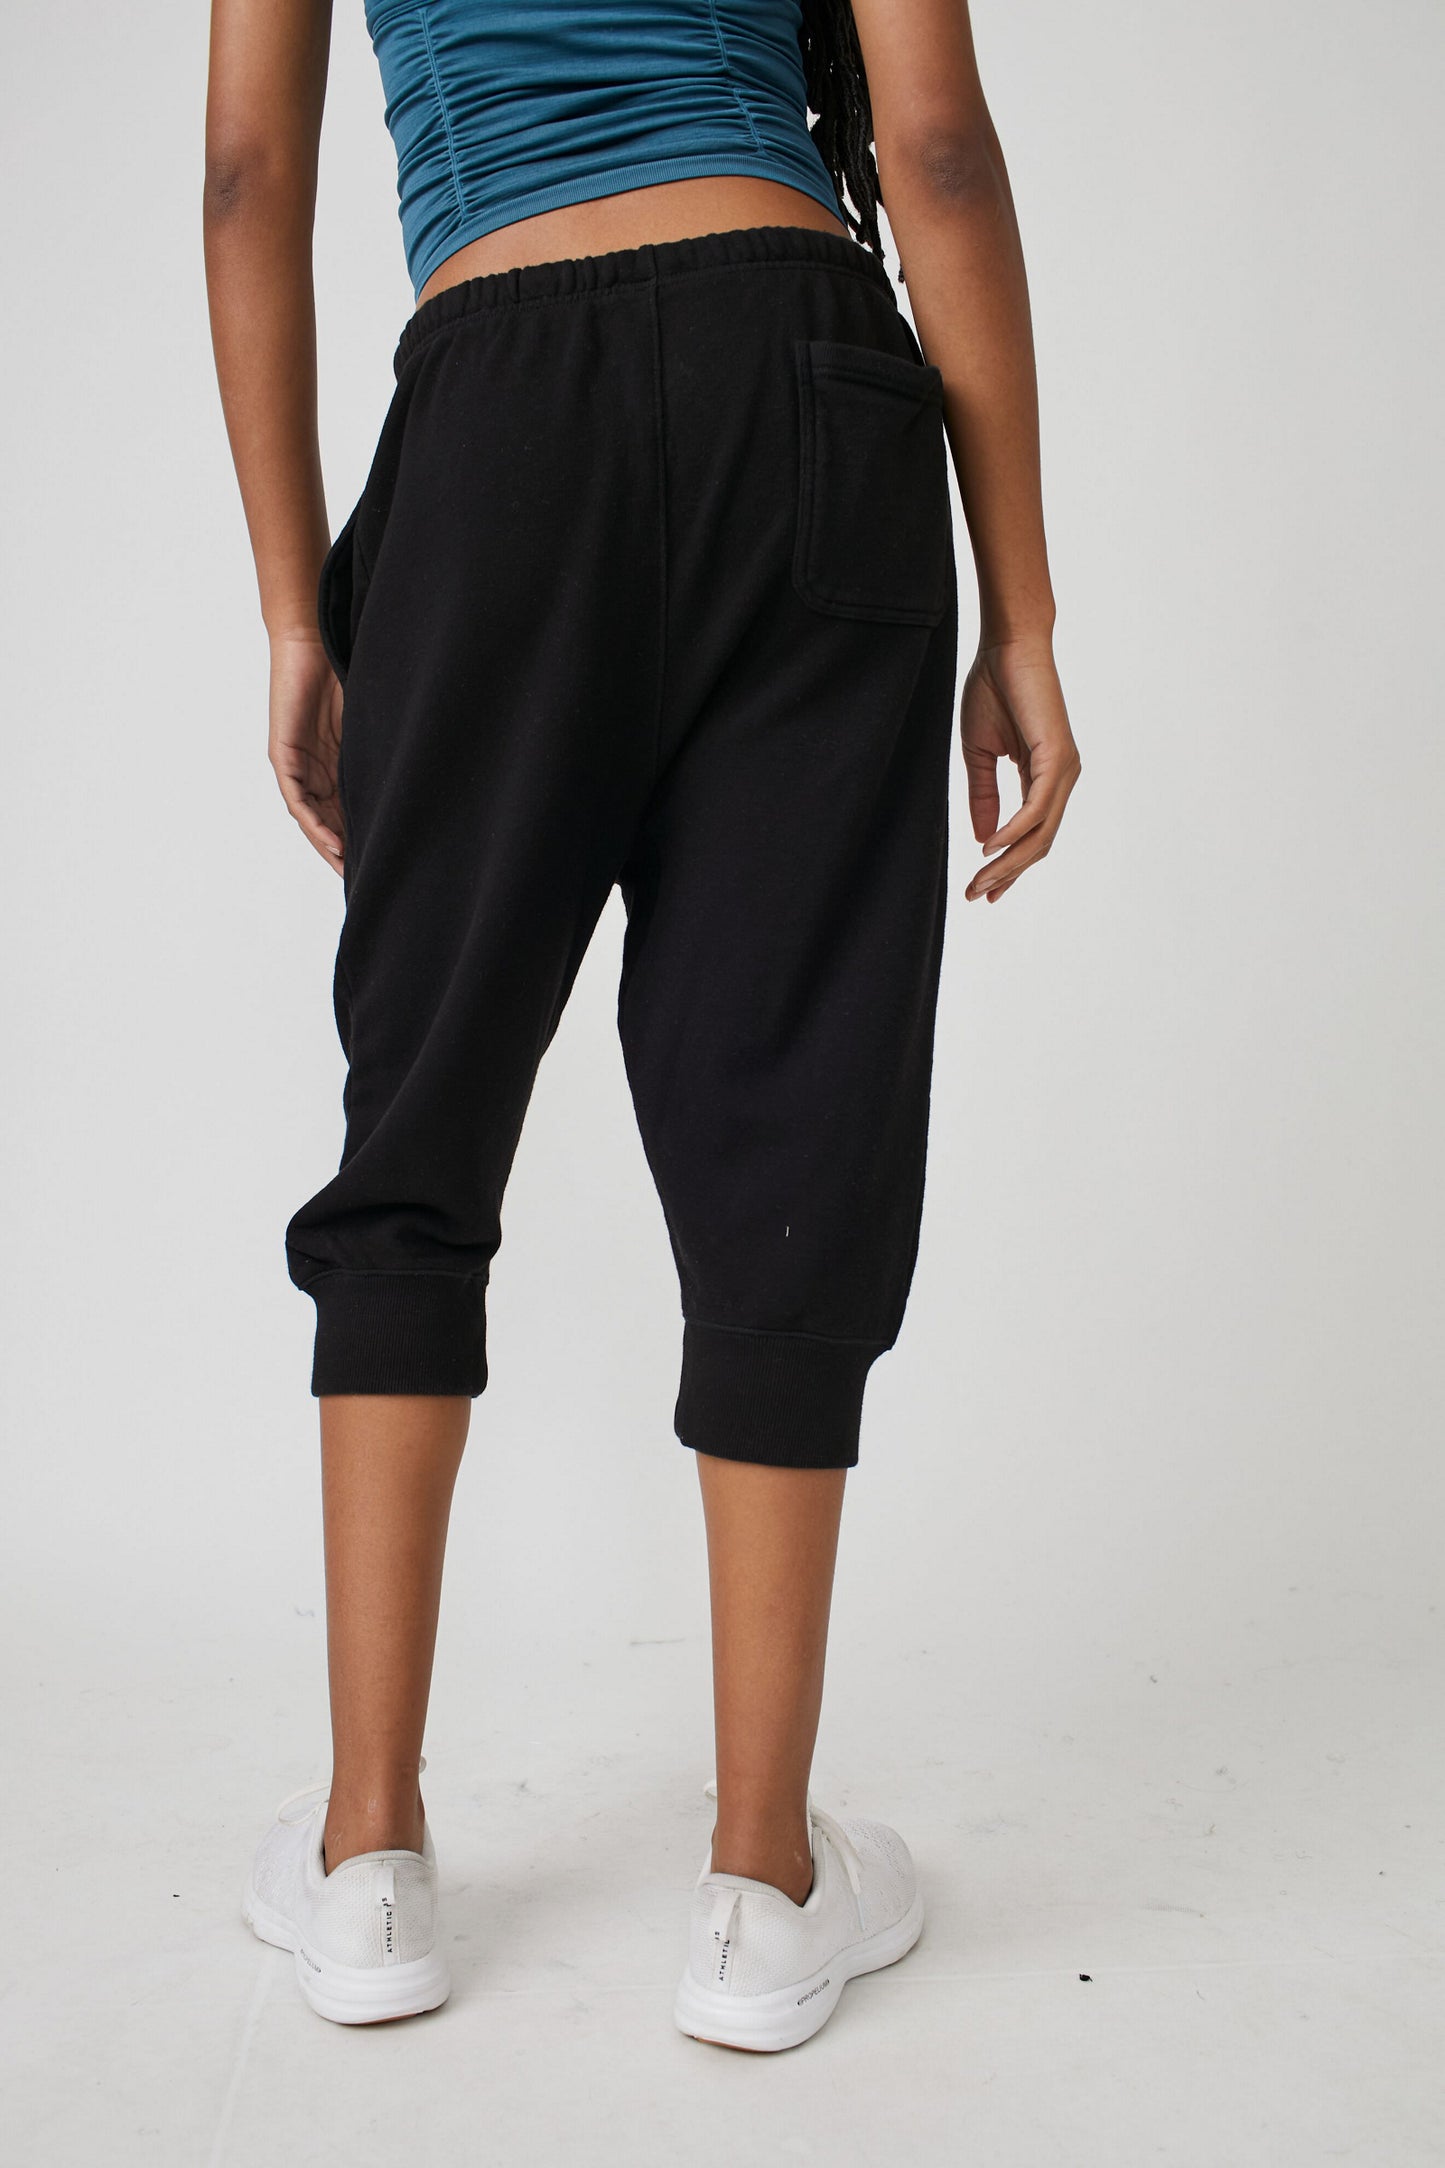 FREE PEOPLE BEST OF CROPPED JOGGER BLACK